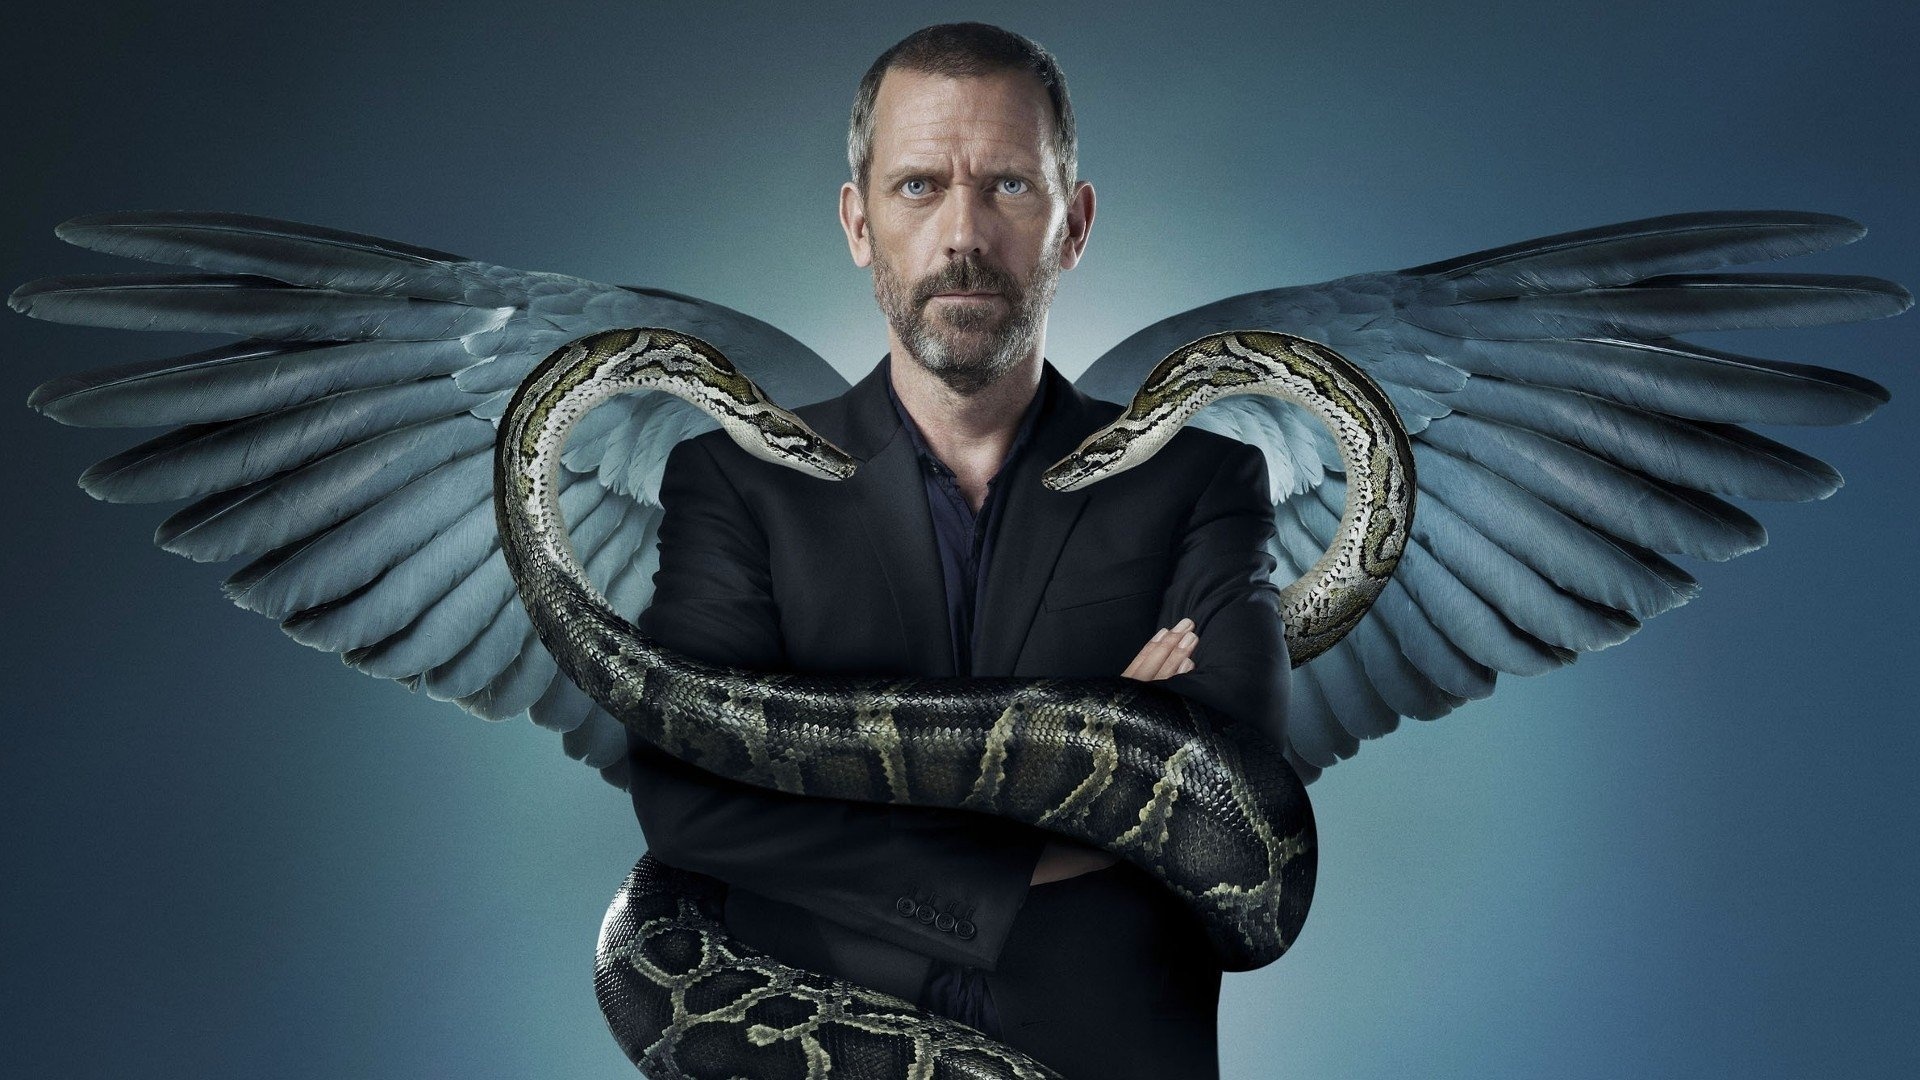 Dr. House: A misanthropic medical genius who heads a team of diagnosticians. 1920x1080 Full HD Background.